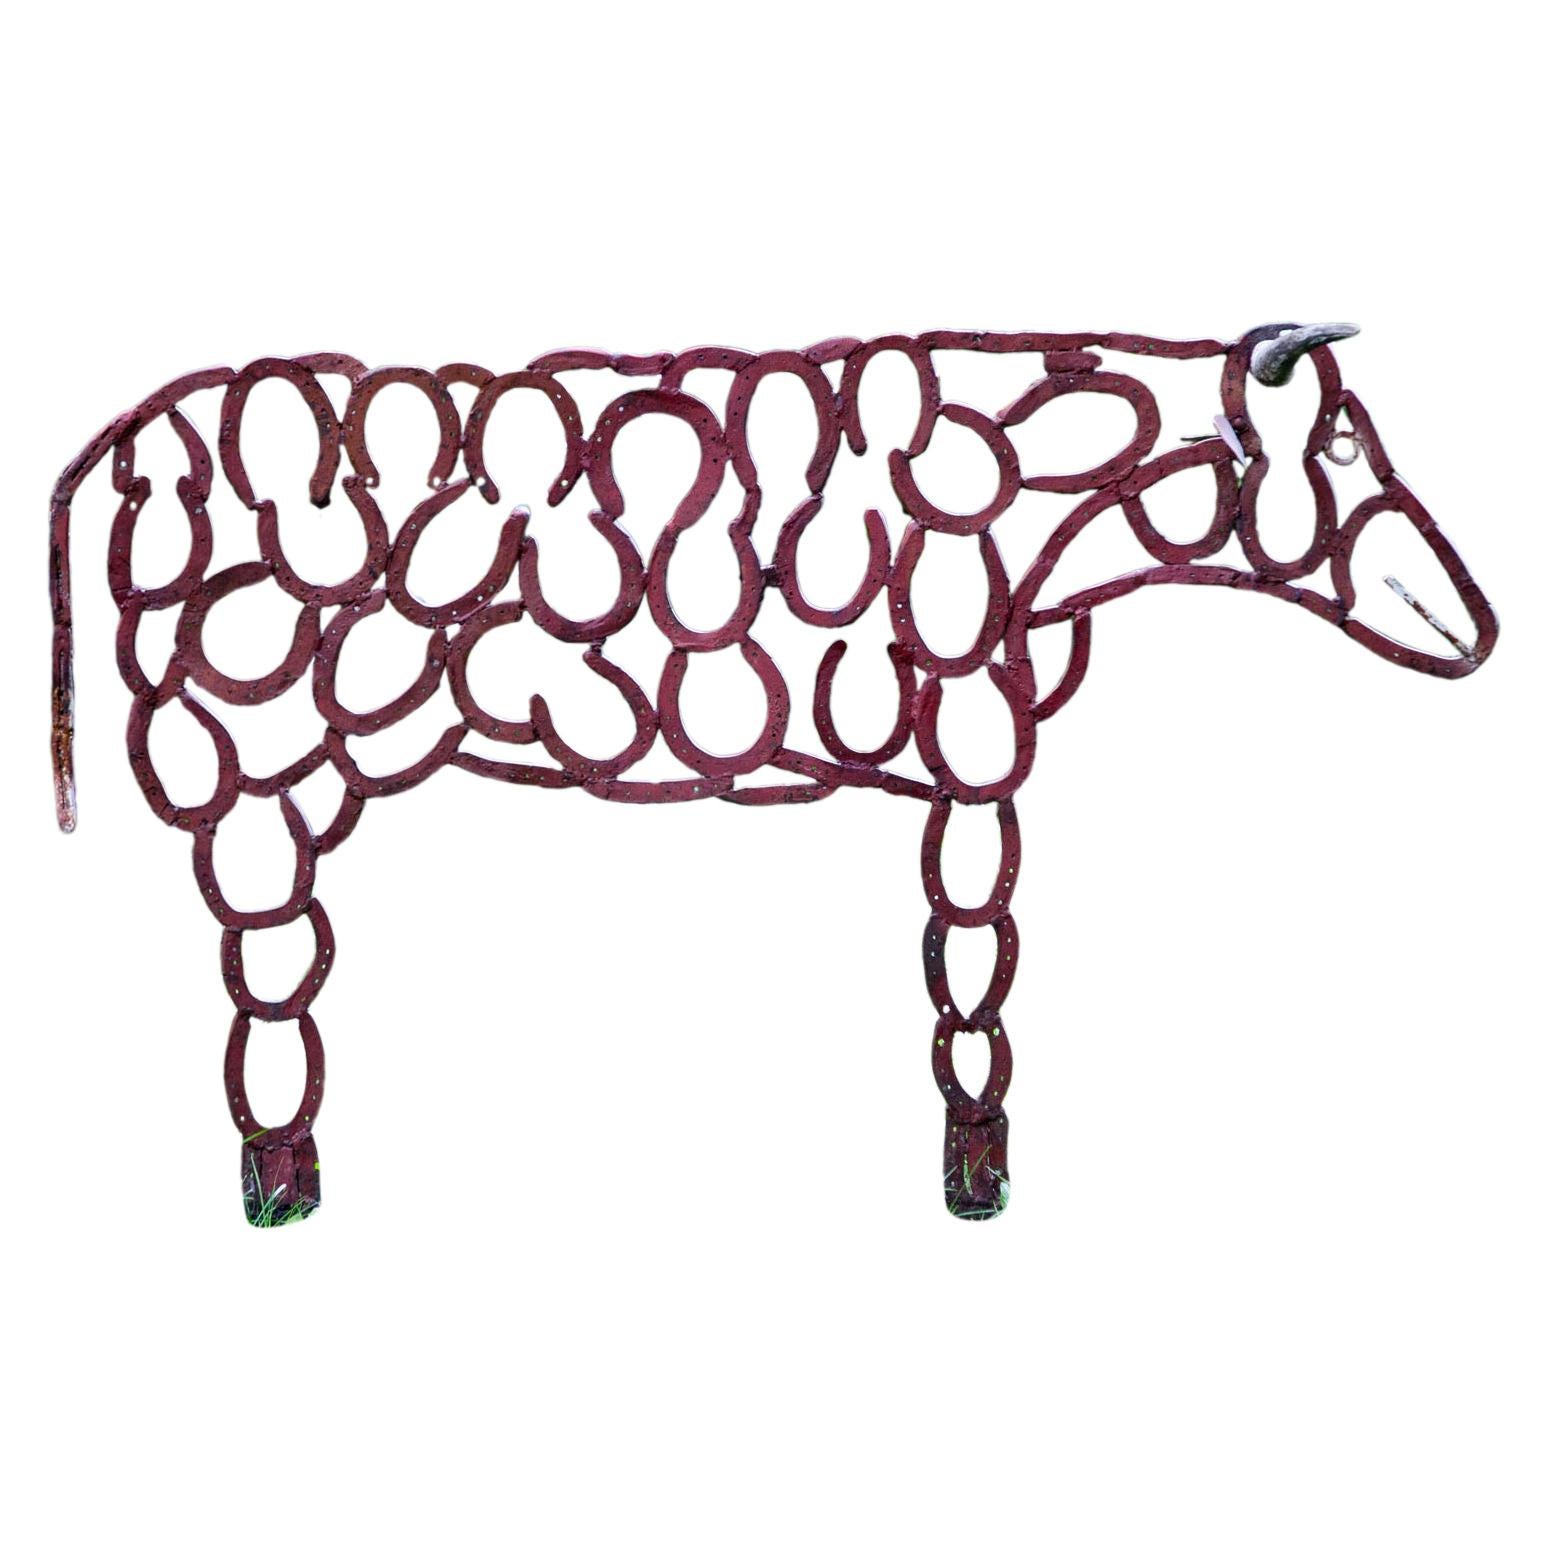 Iron Sculpture of a Cow, 20th Century